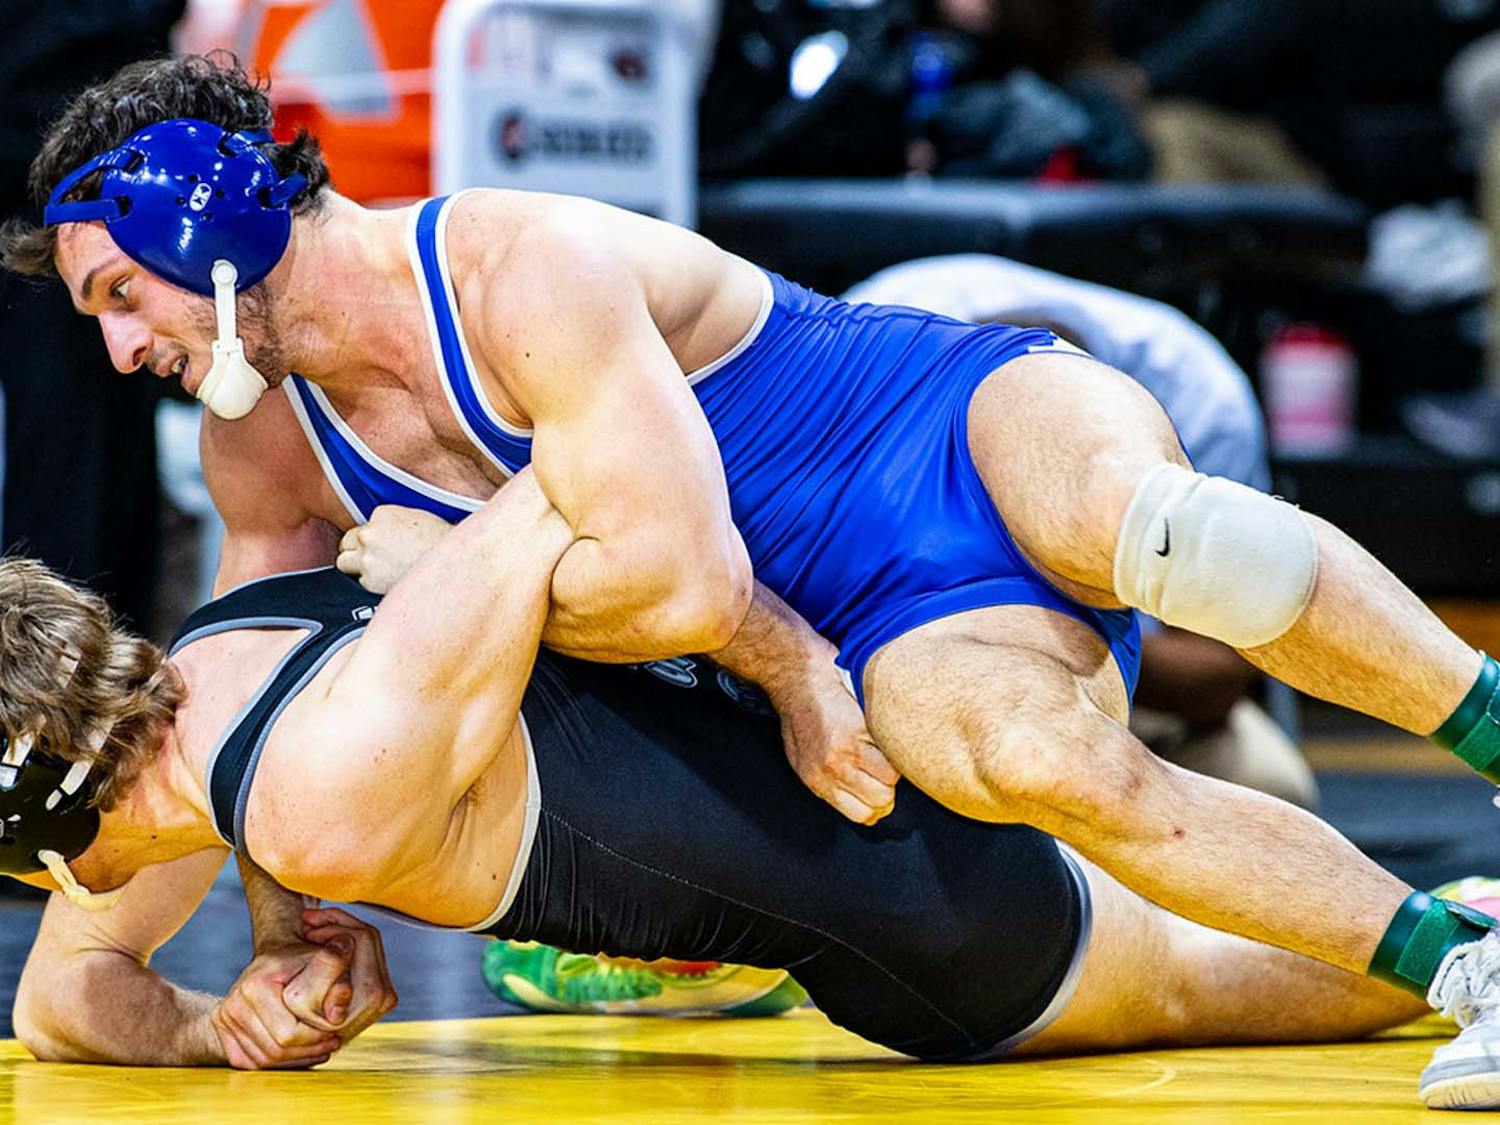 Junior Wade Unger continued his promising start to the season in Duke's Mid-Atlantic duals.